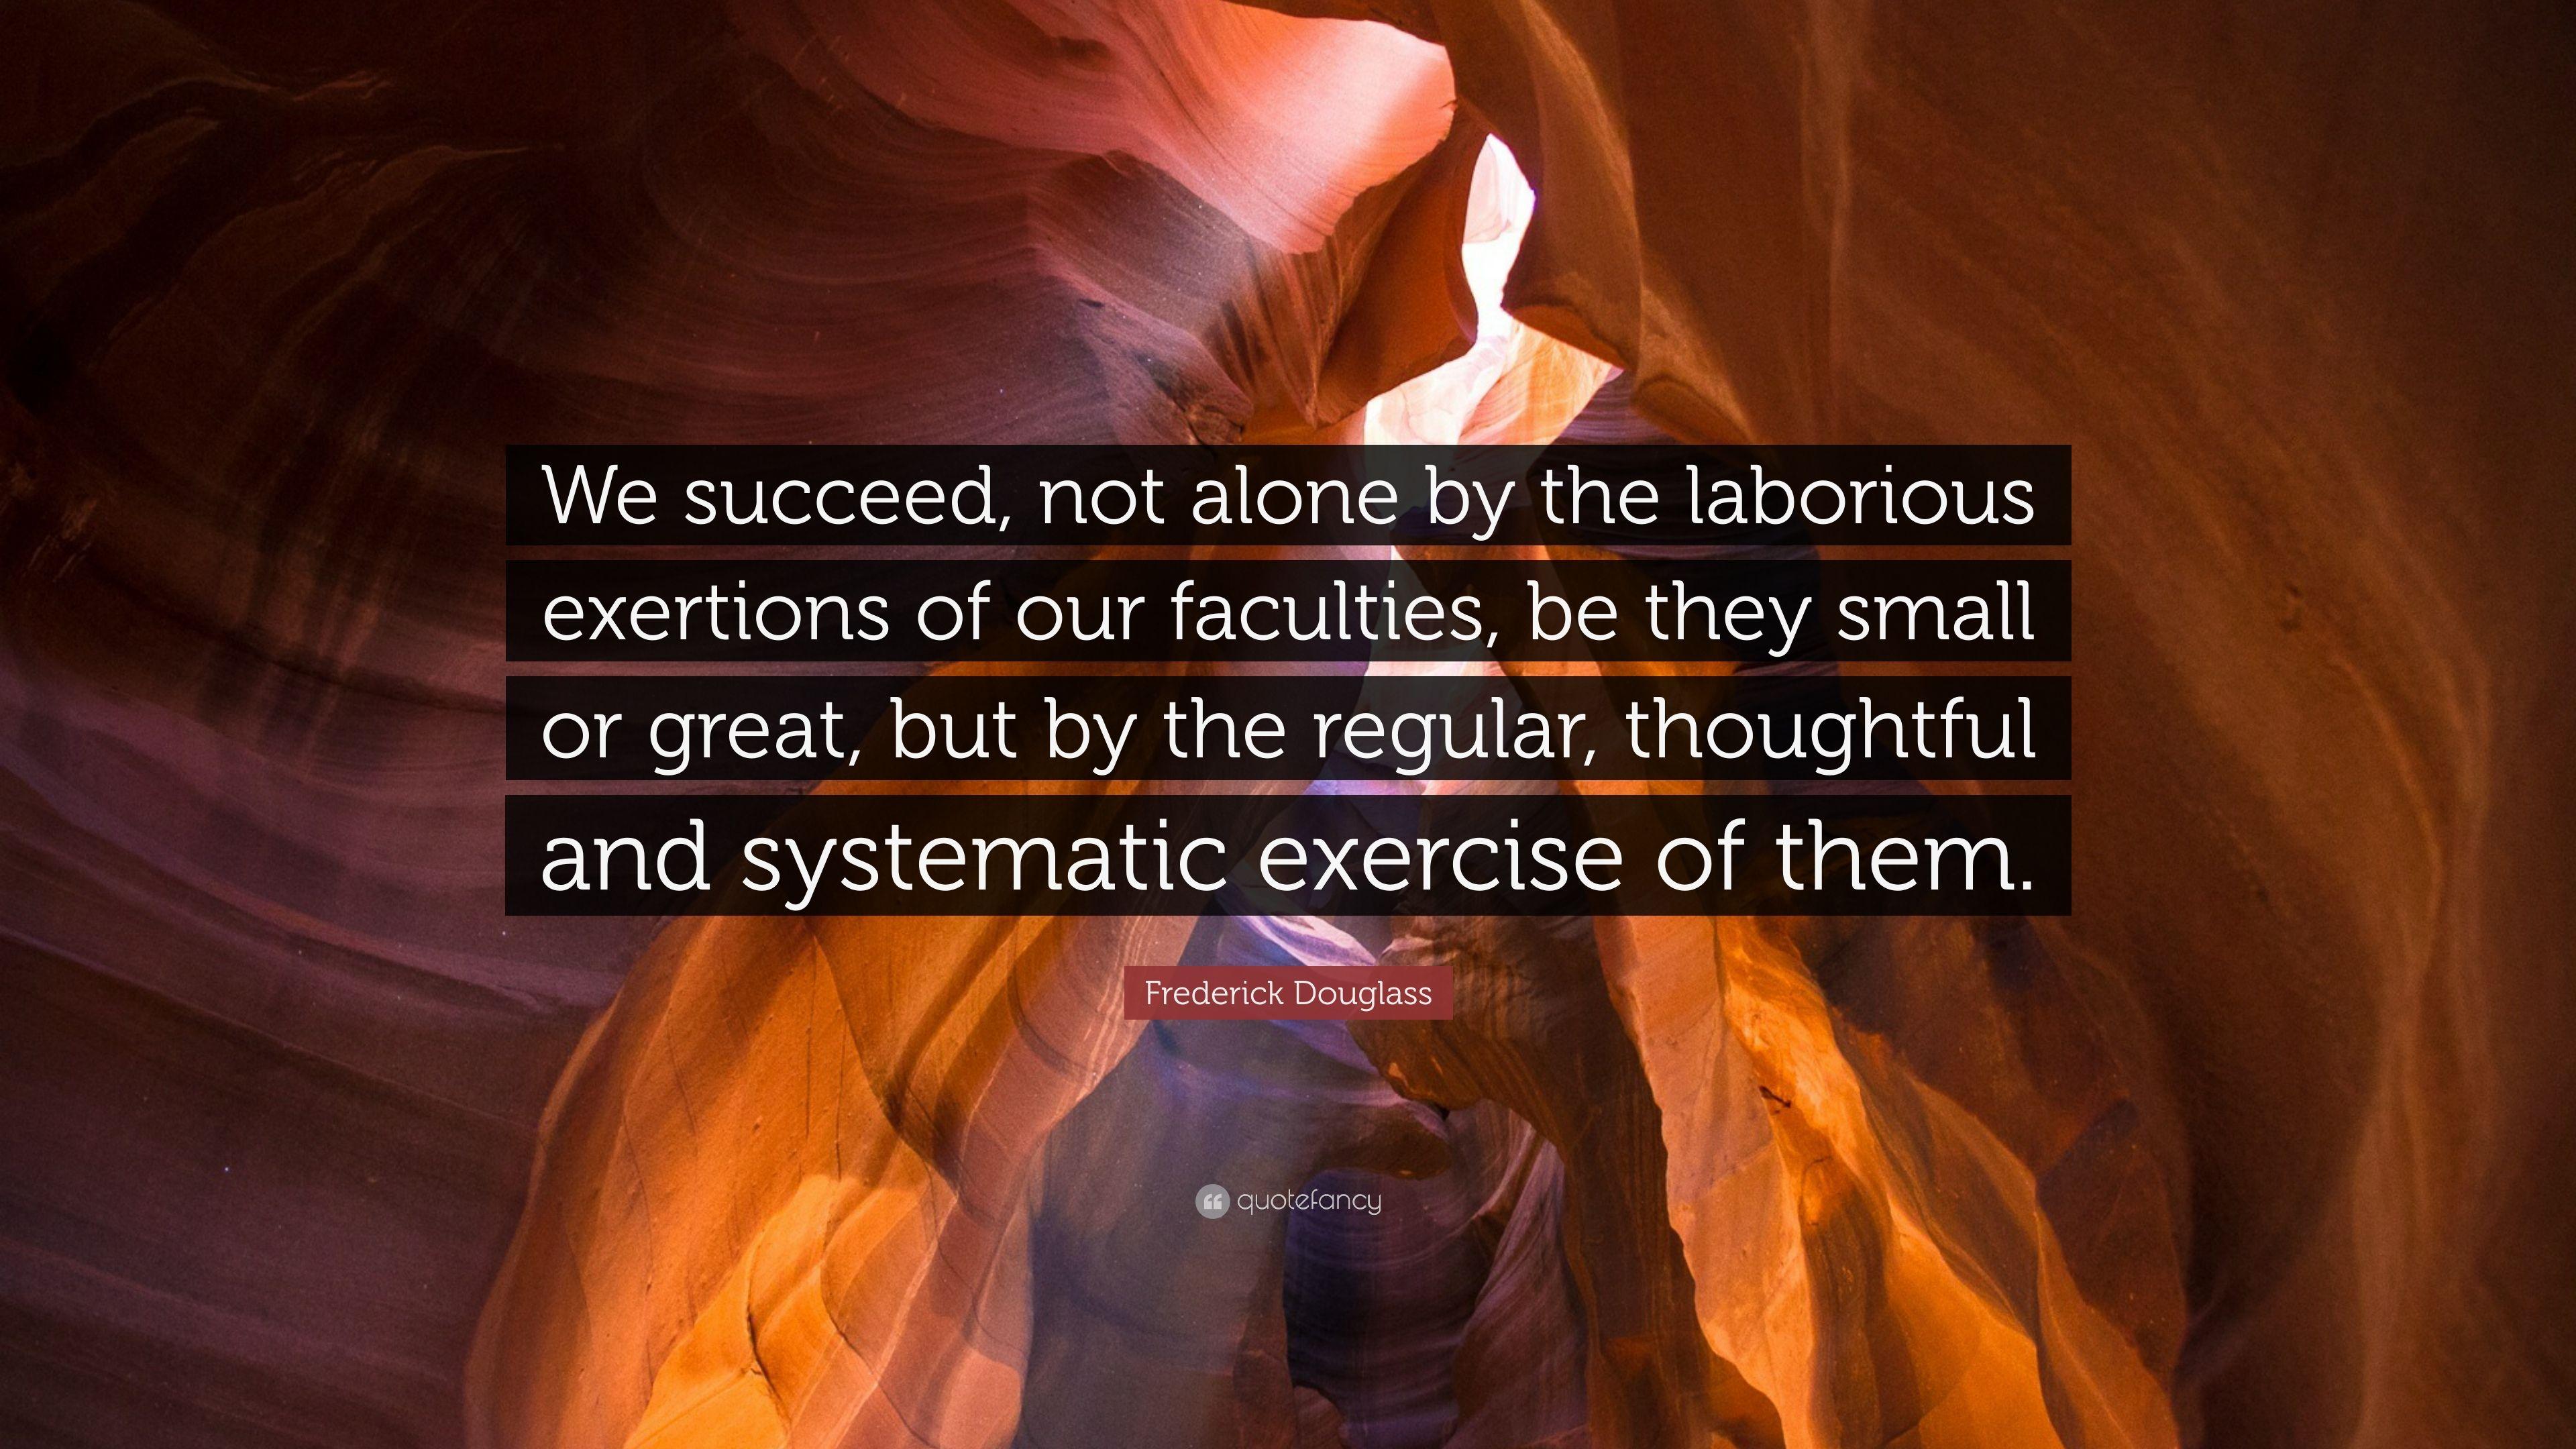 Frederick Douglass Quote: “We succeed, not alone